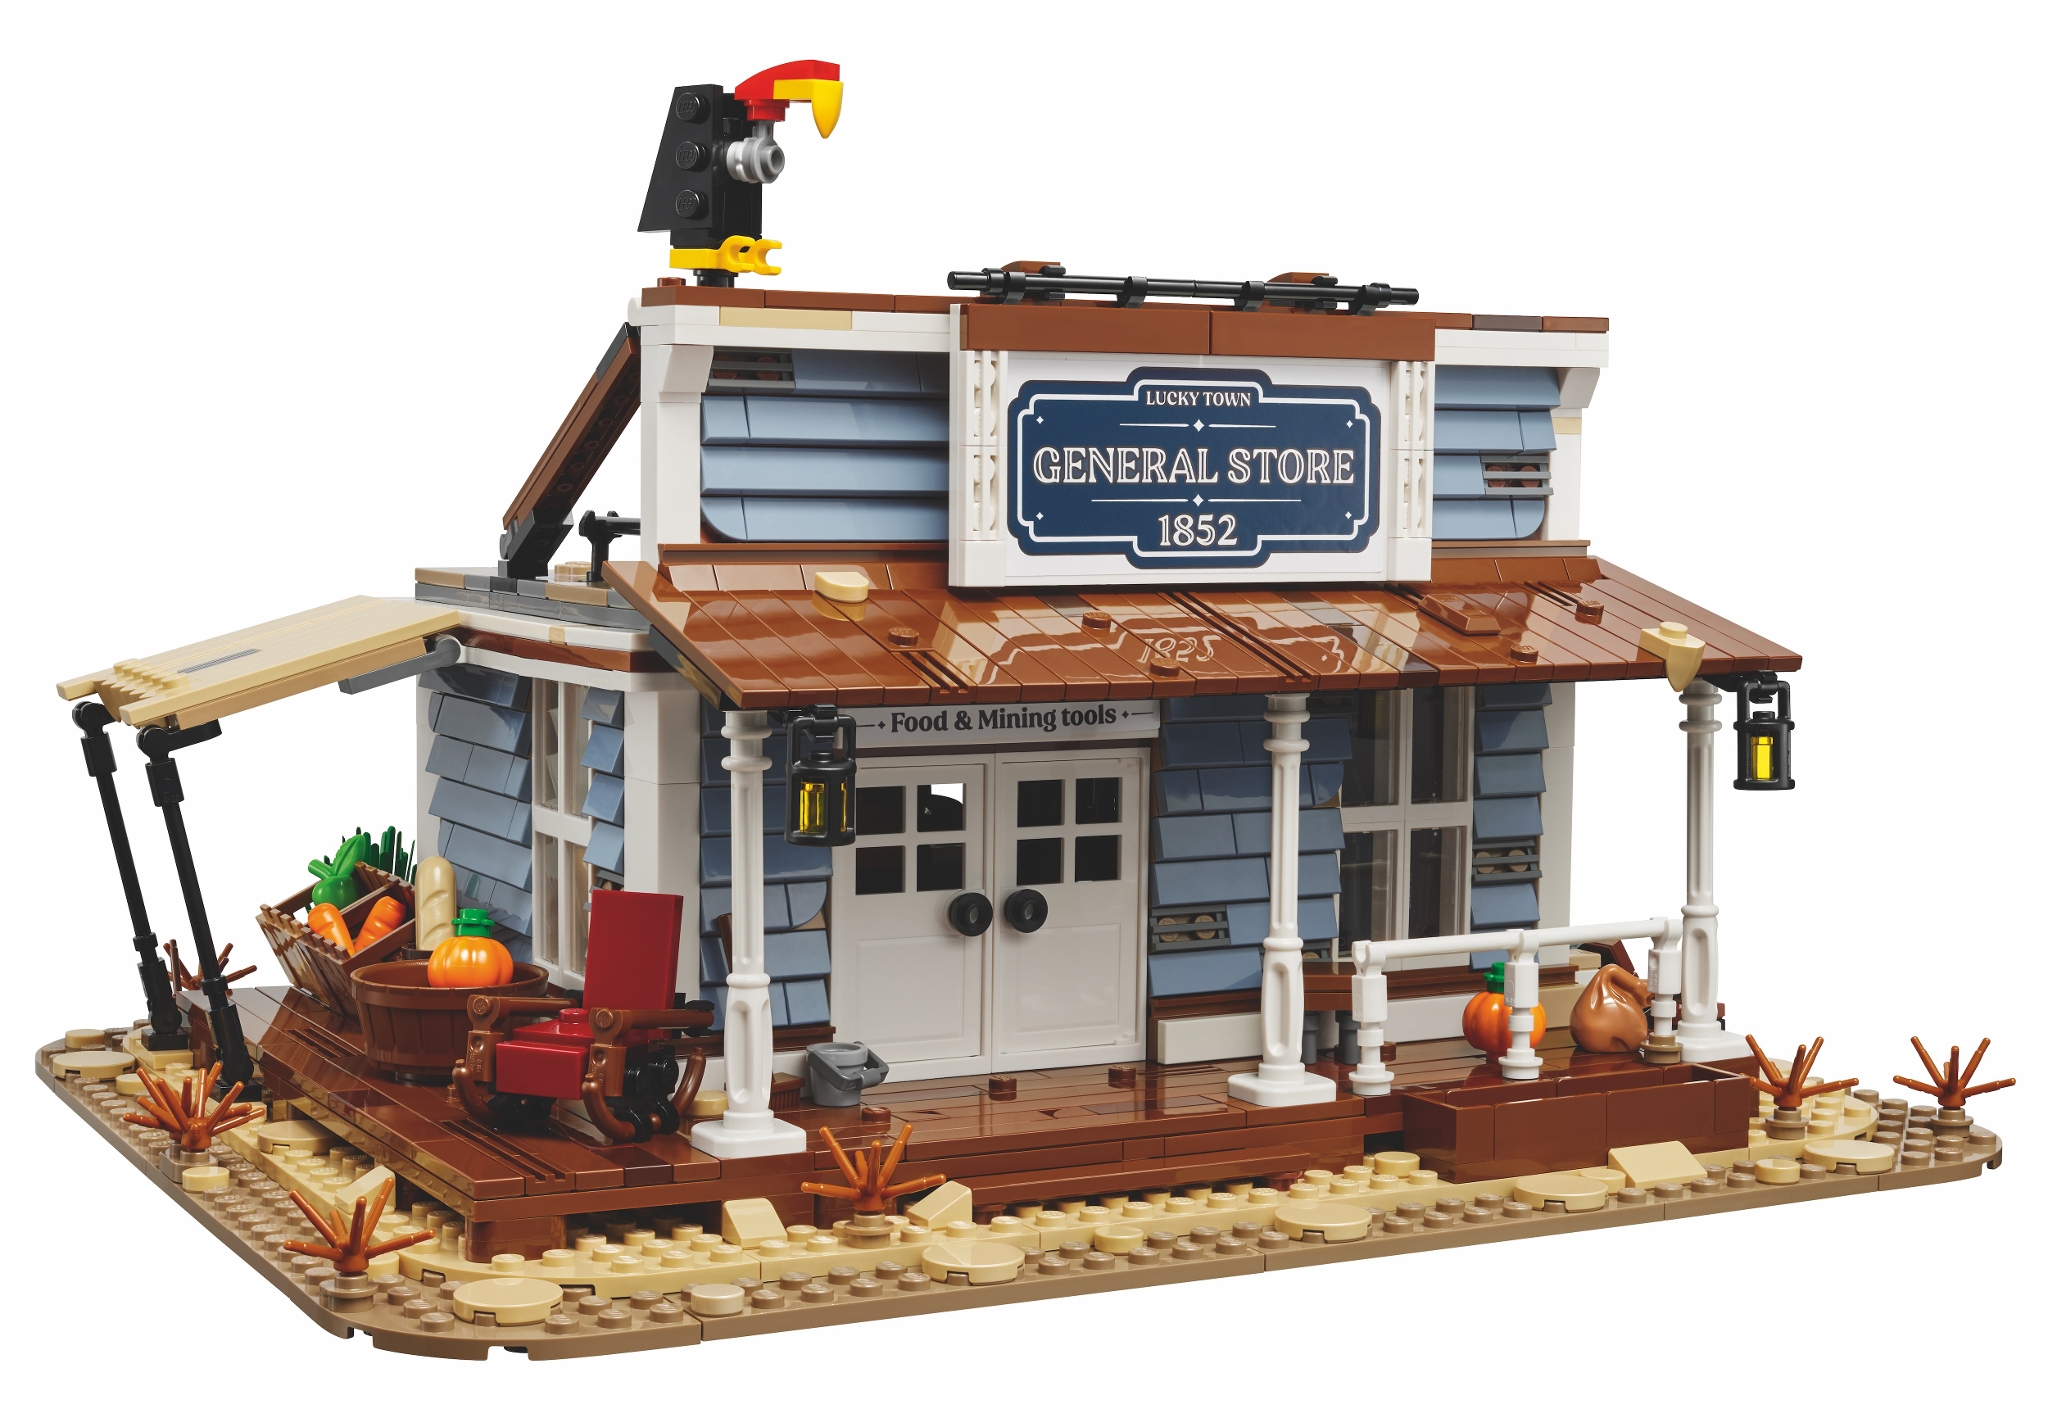 General Store from BrickLink